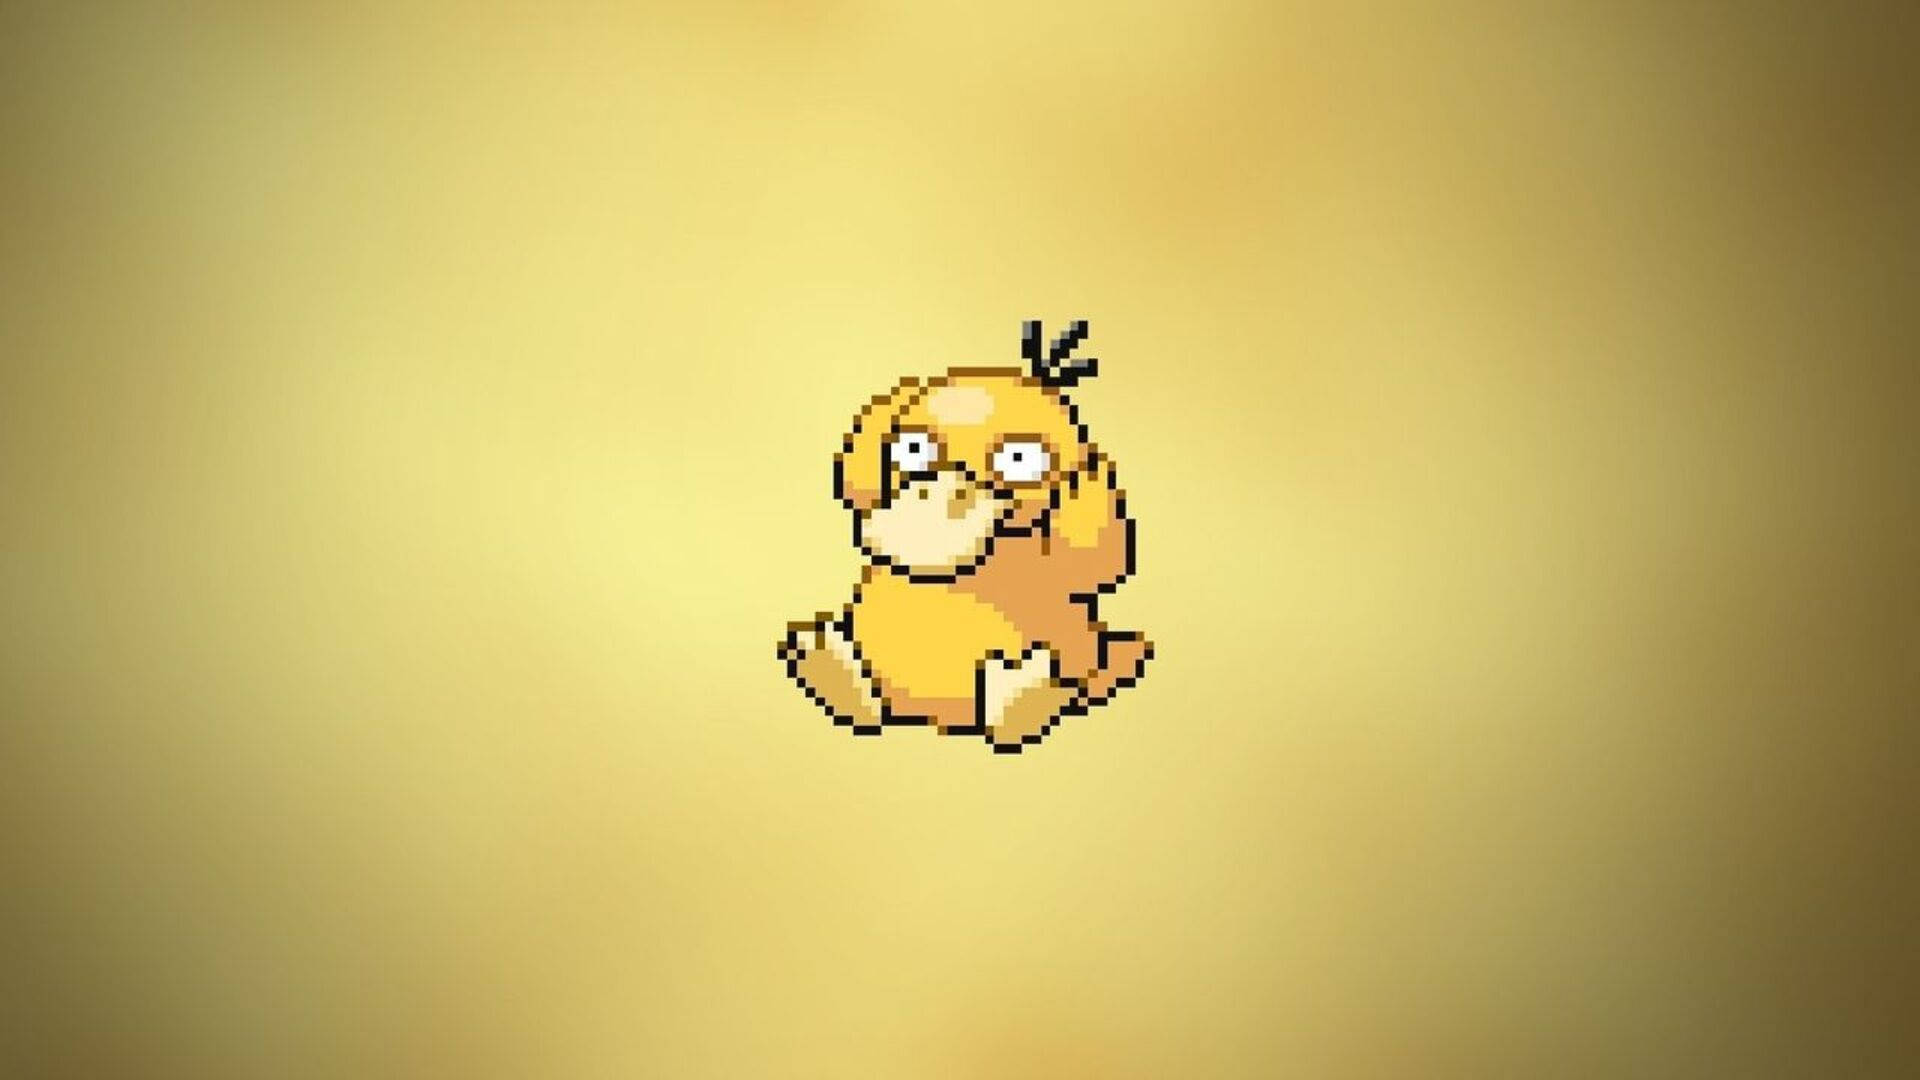 Let Psyduck Use Its Psychic Ability And Lead You On A Virtual Journey